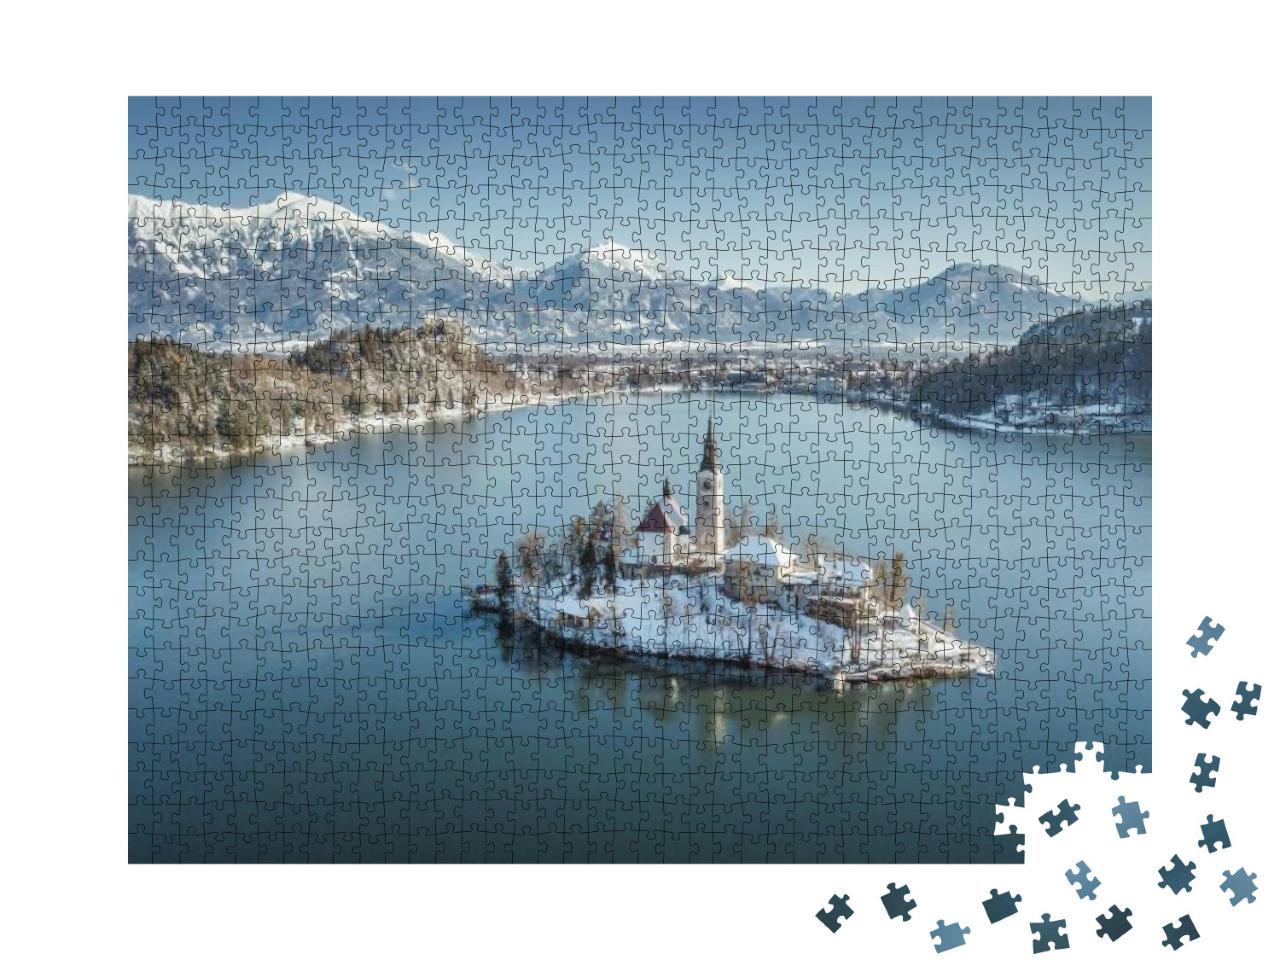 Puzzle 1000 Teile „Insel Bled im See in Slowenien“